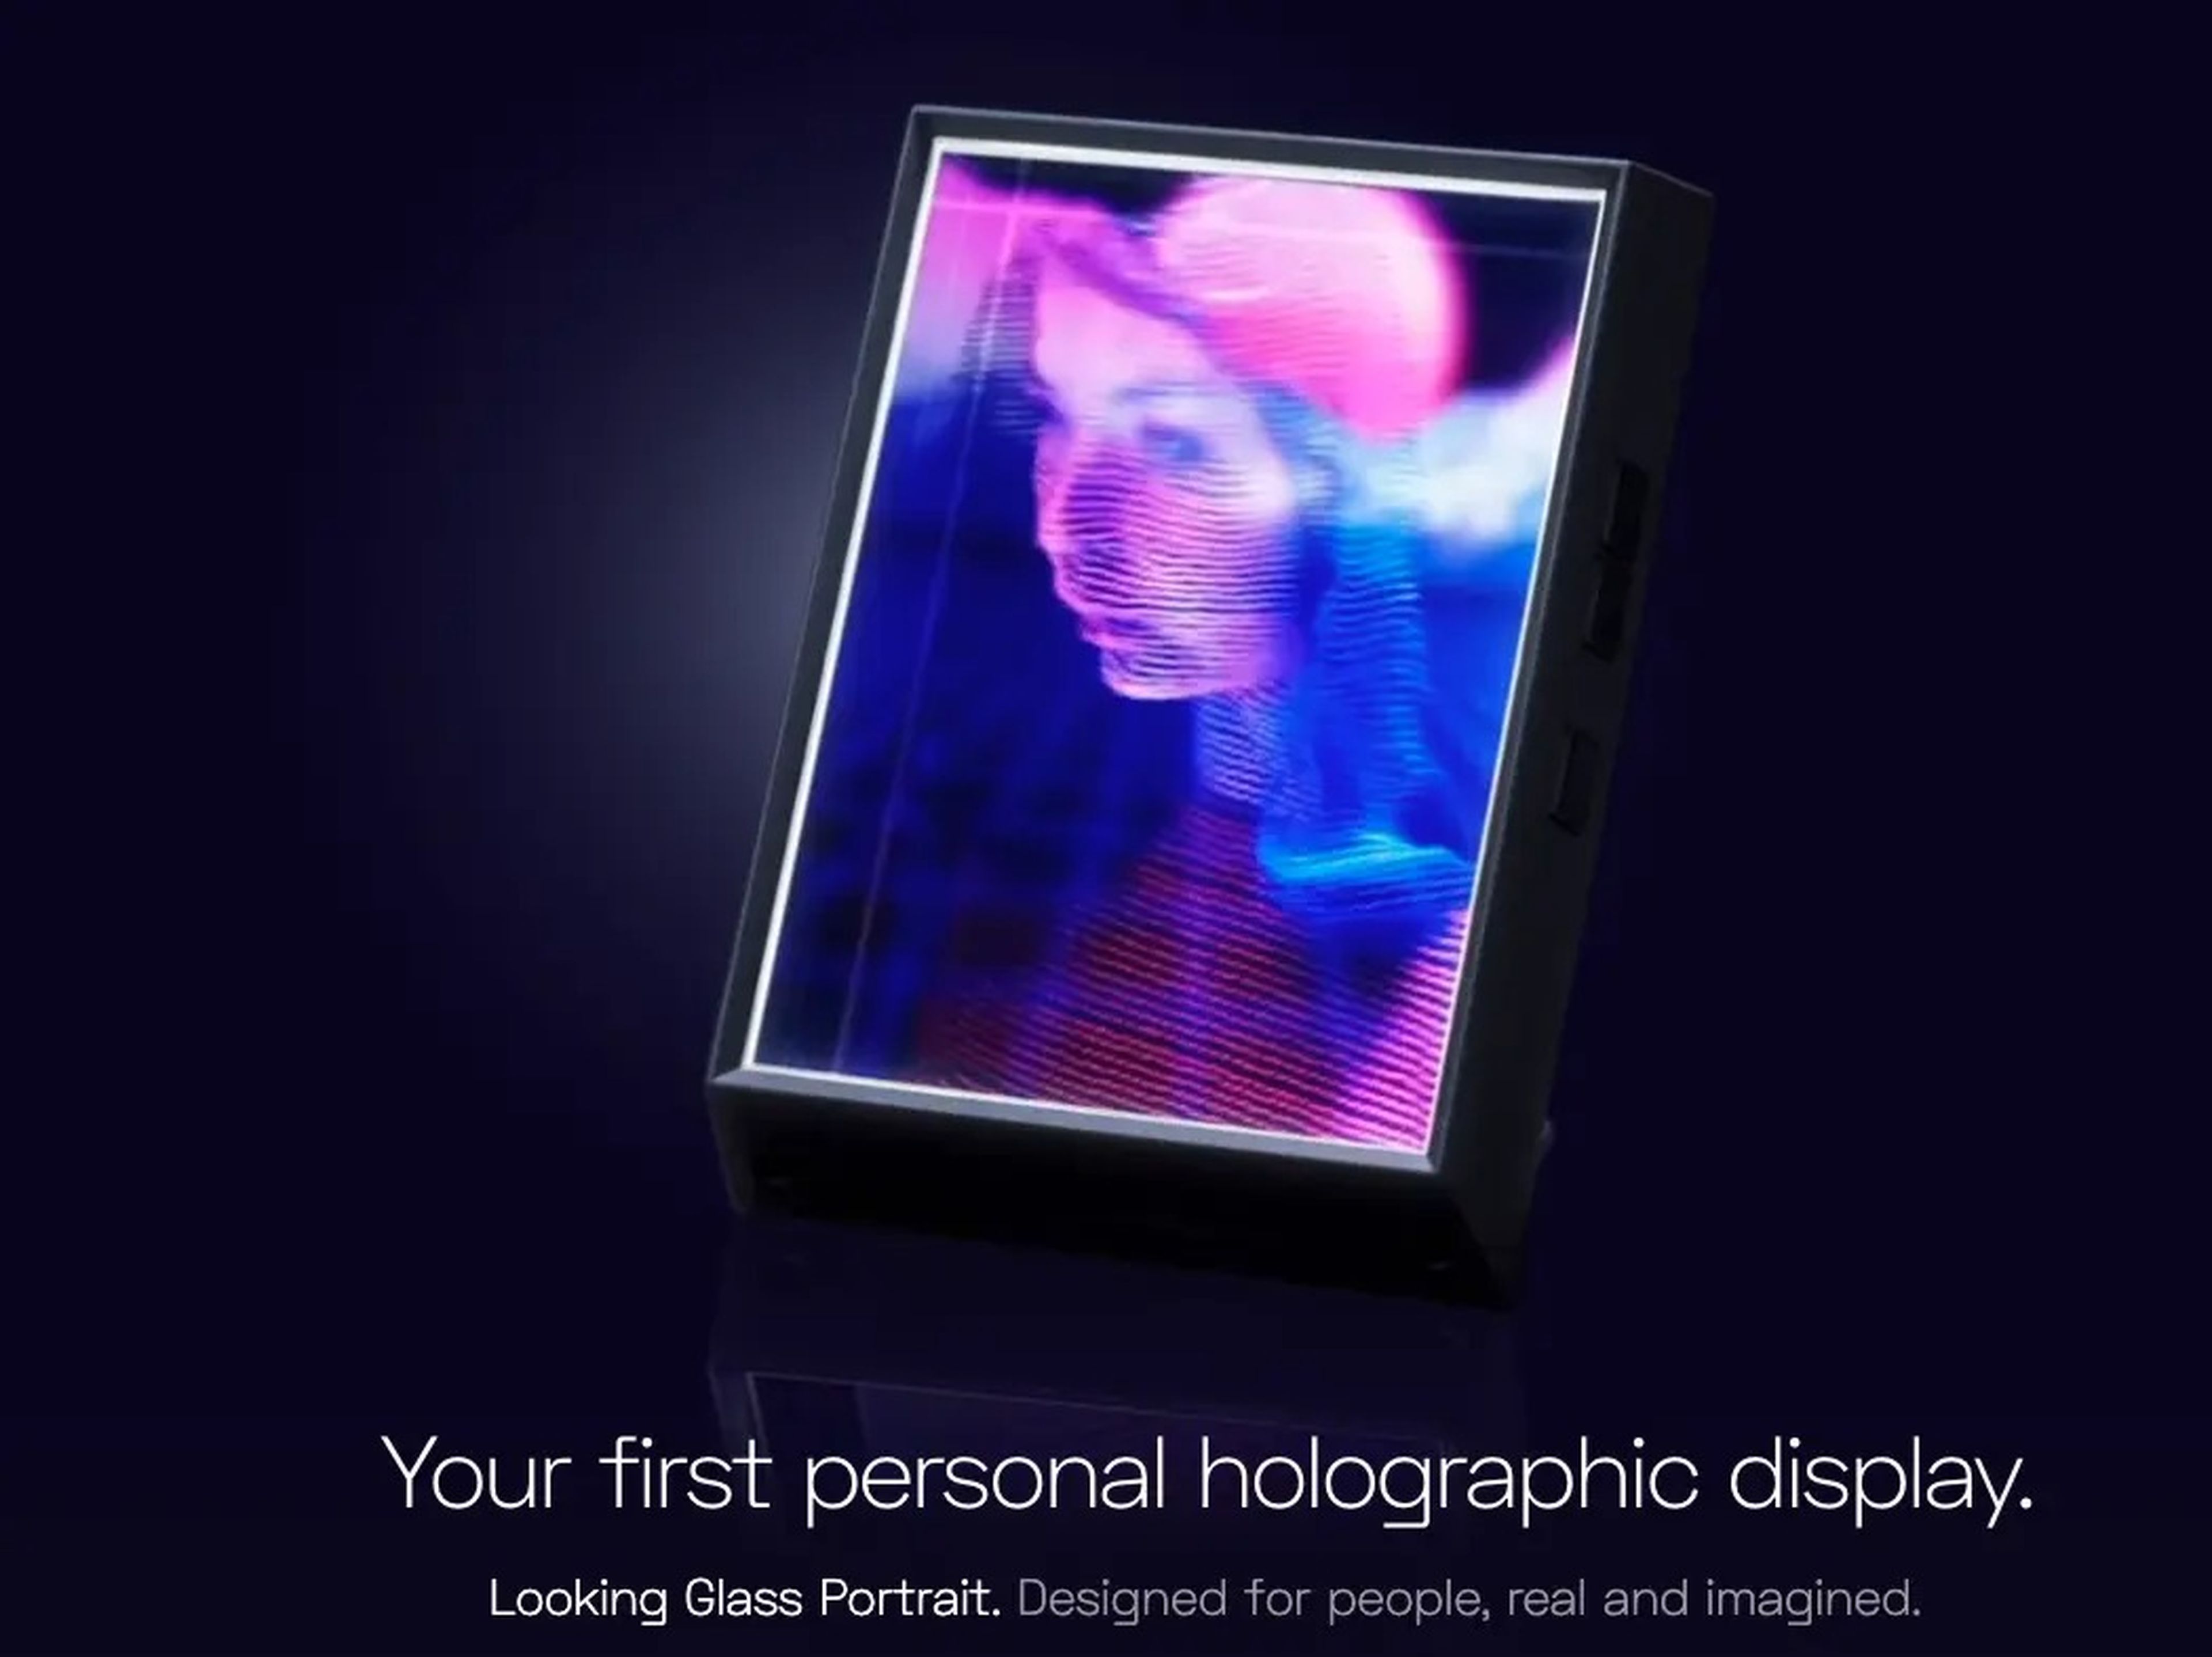 Looking Glass Factory allows people to sell their holograms as NFTs